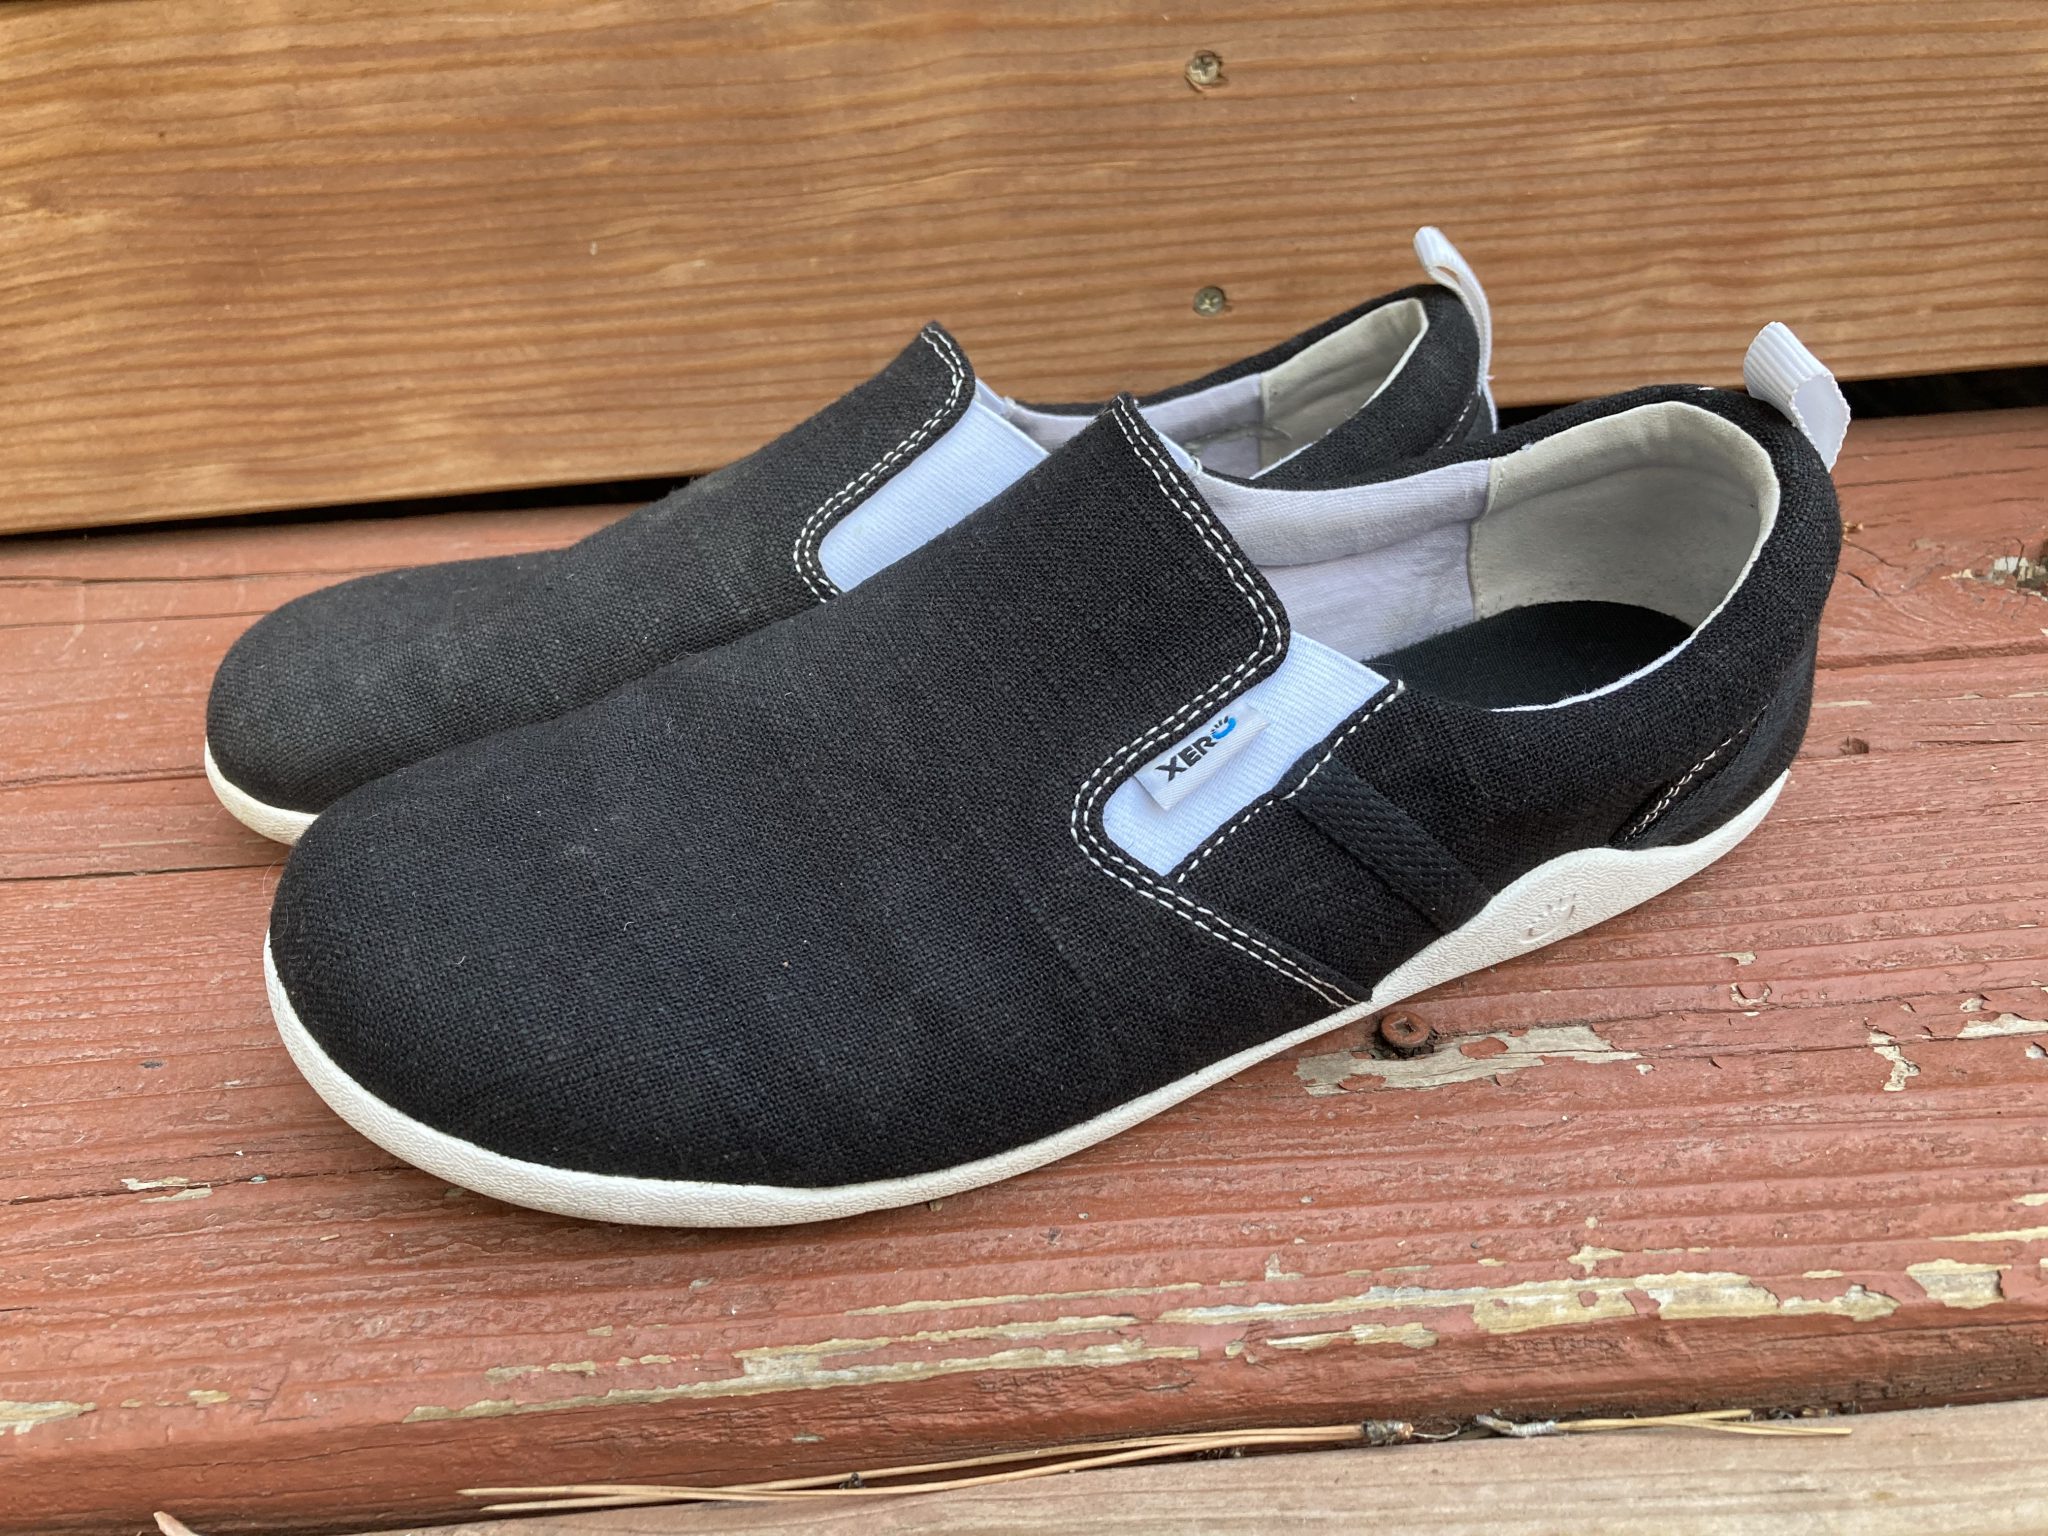 Xero Shoes Fall 2020 New Release Reviews - Huck Adventures